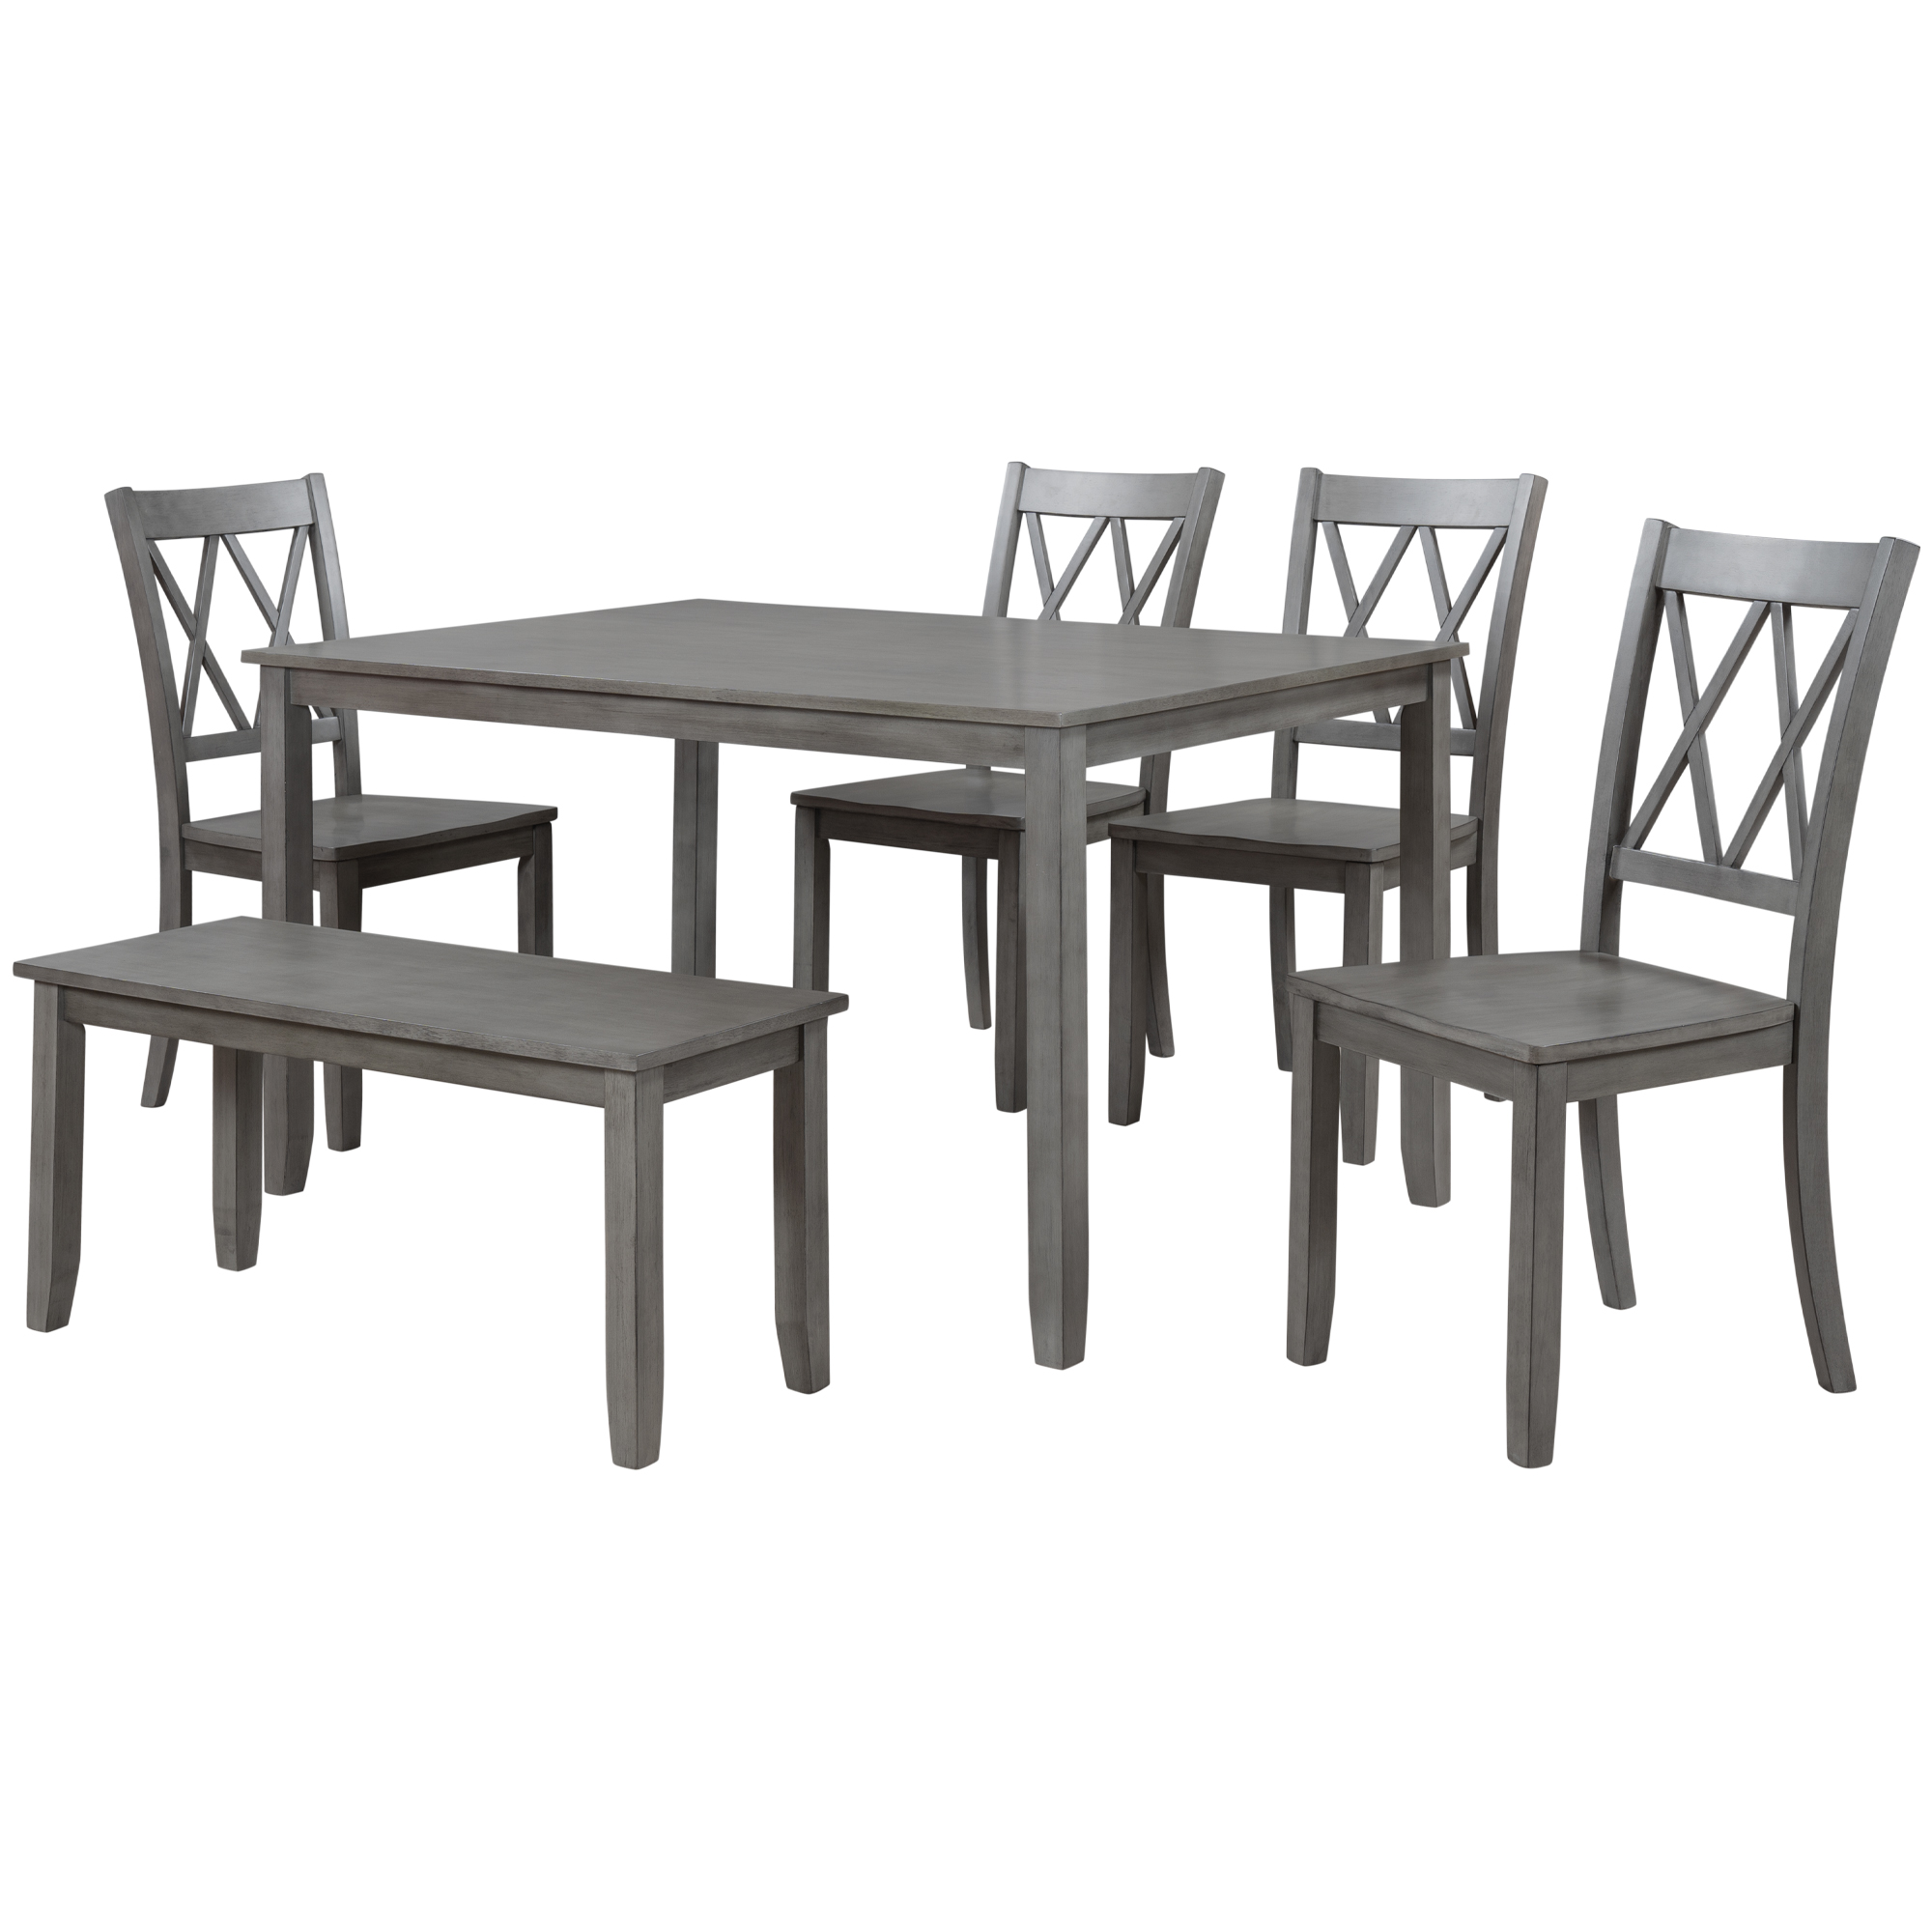 6-piece Wooden Kitchen Table set, Farmhouse Rustic Dining Table set with Cross Back 4 Chairs and Bench,Antique Graywash-CASAINC